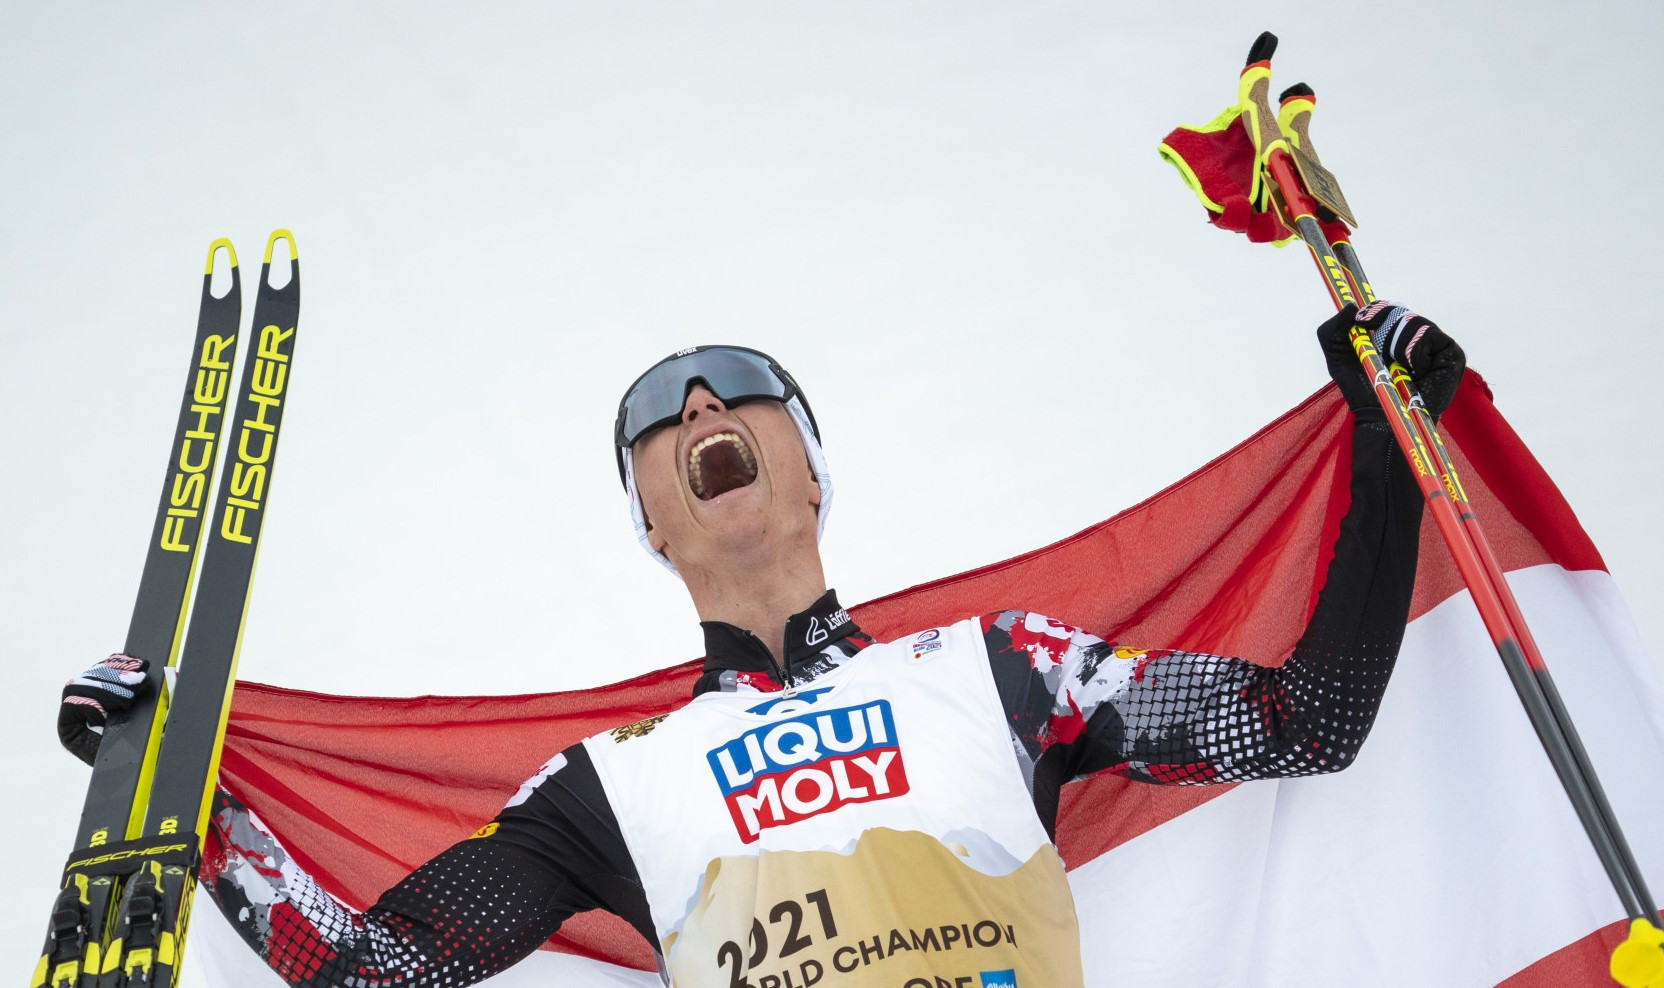 Large hill world champion Johannes Lamparter was victorious in Klingenthal ©Getty Images